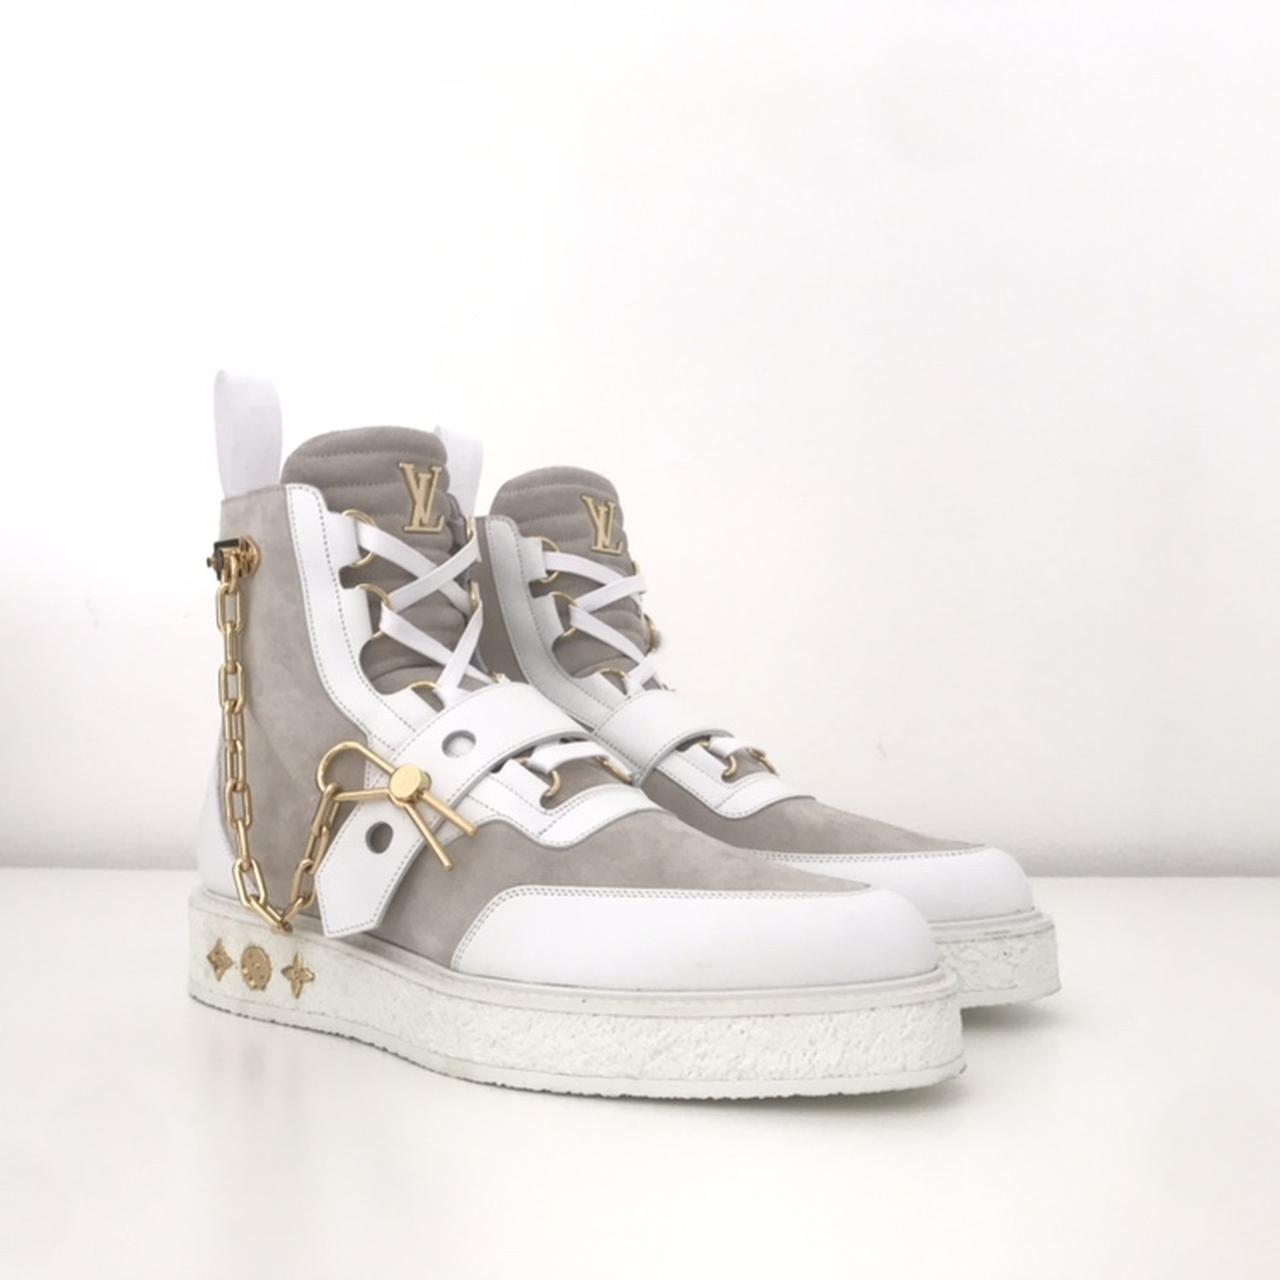 Lv creeper patent leather boots Louis Vuitton White size 43 EU in